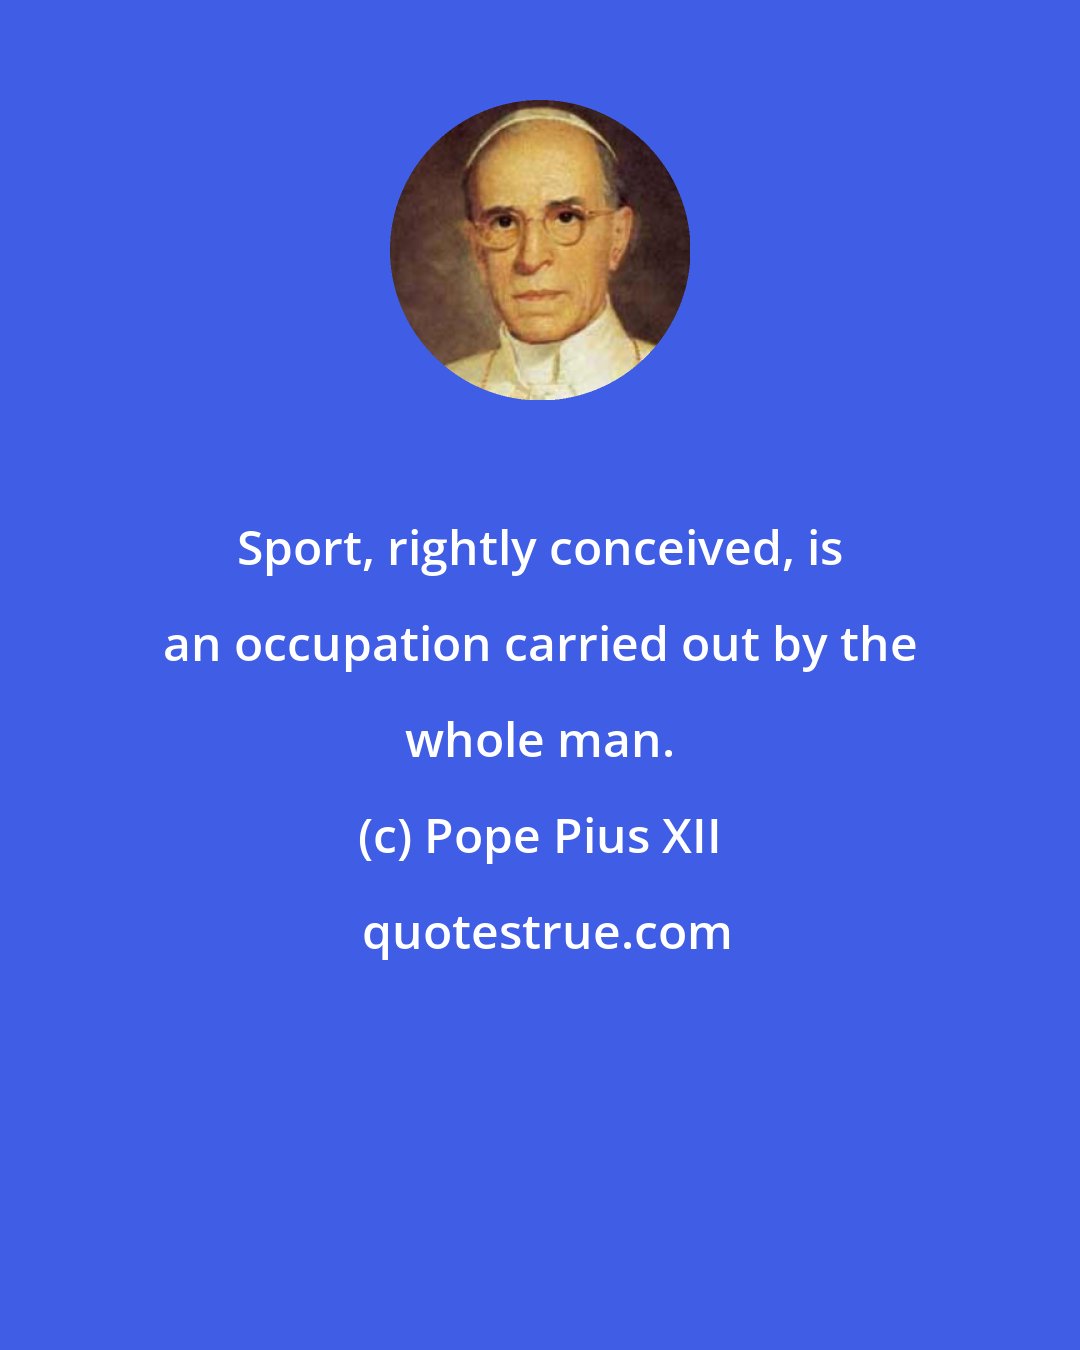 Pope Pius XII: Sport, rightly conceived, is an occupation carried out by the whole man.